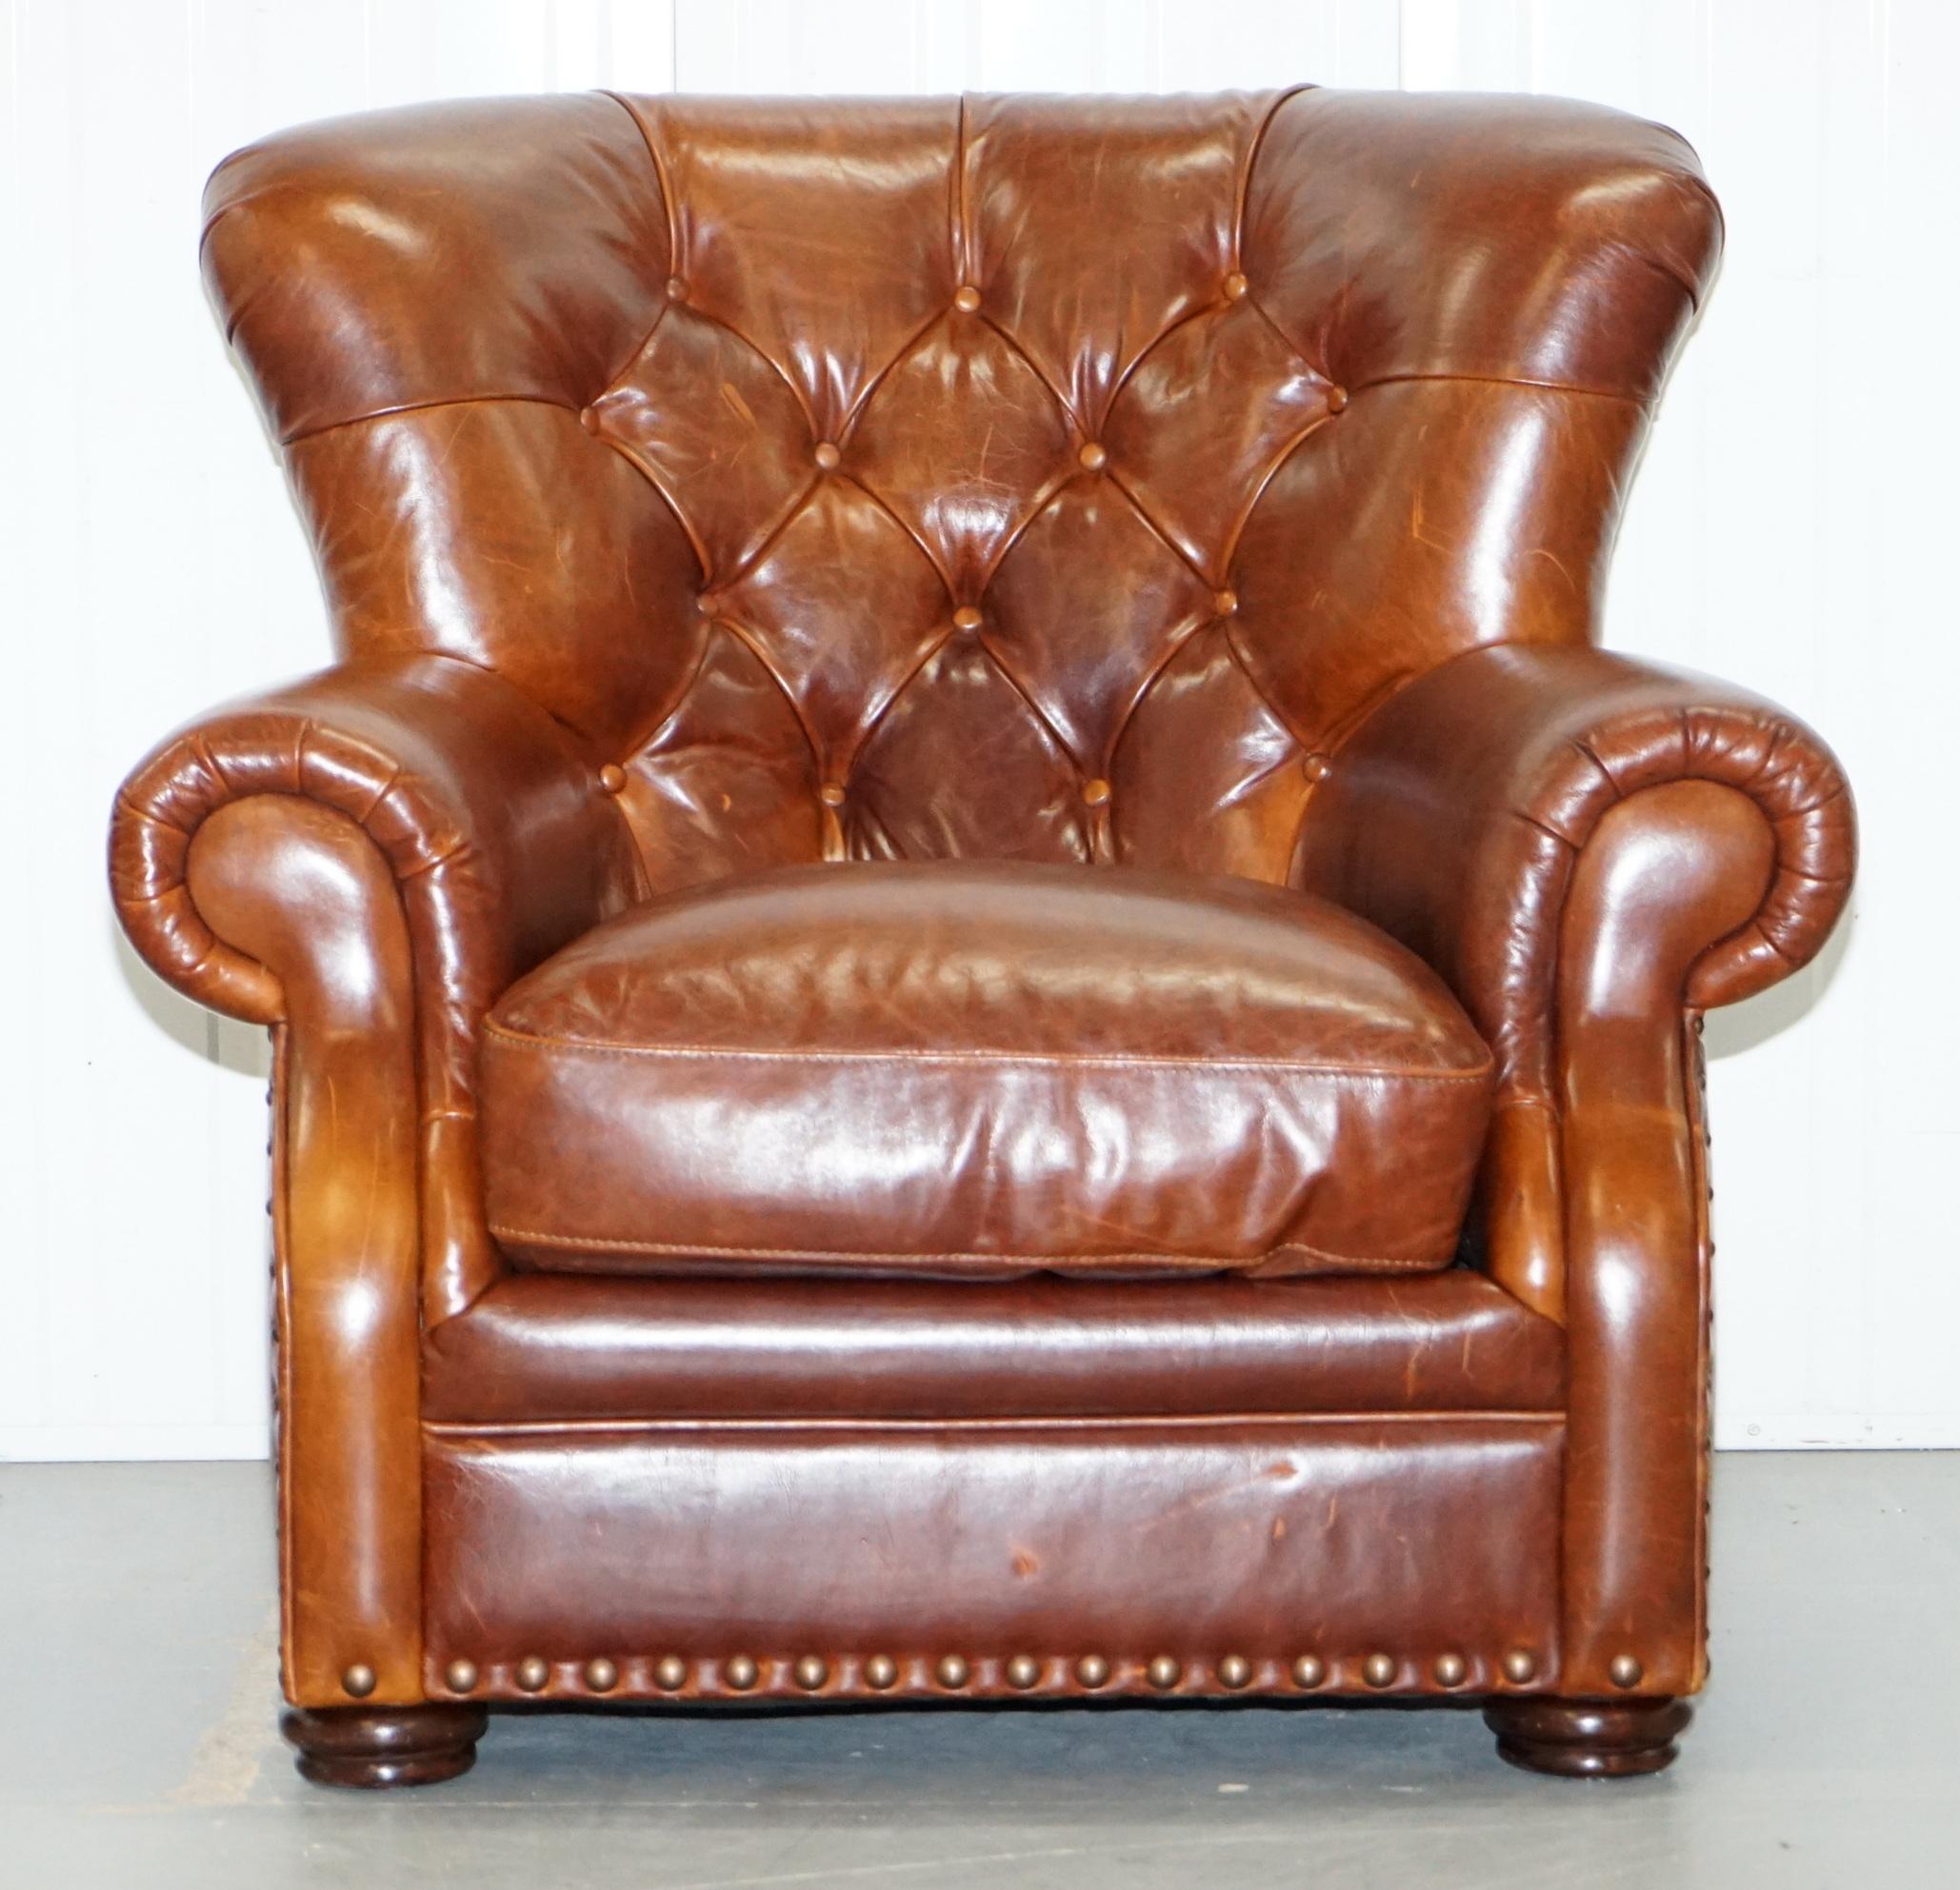 We are delighted to offer this Ralph Lauren Writers style aged brown vintage leather armchair


A fantastic iconic armchair, the original has graced many a front page in its time.

A very good looking and well-made piece in lightly restored